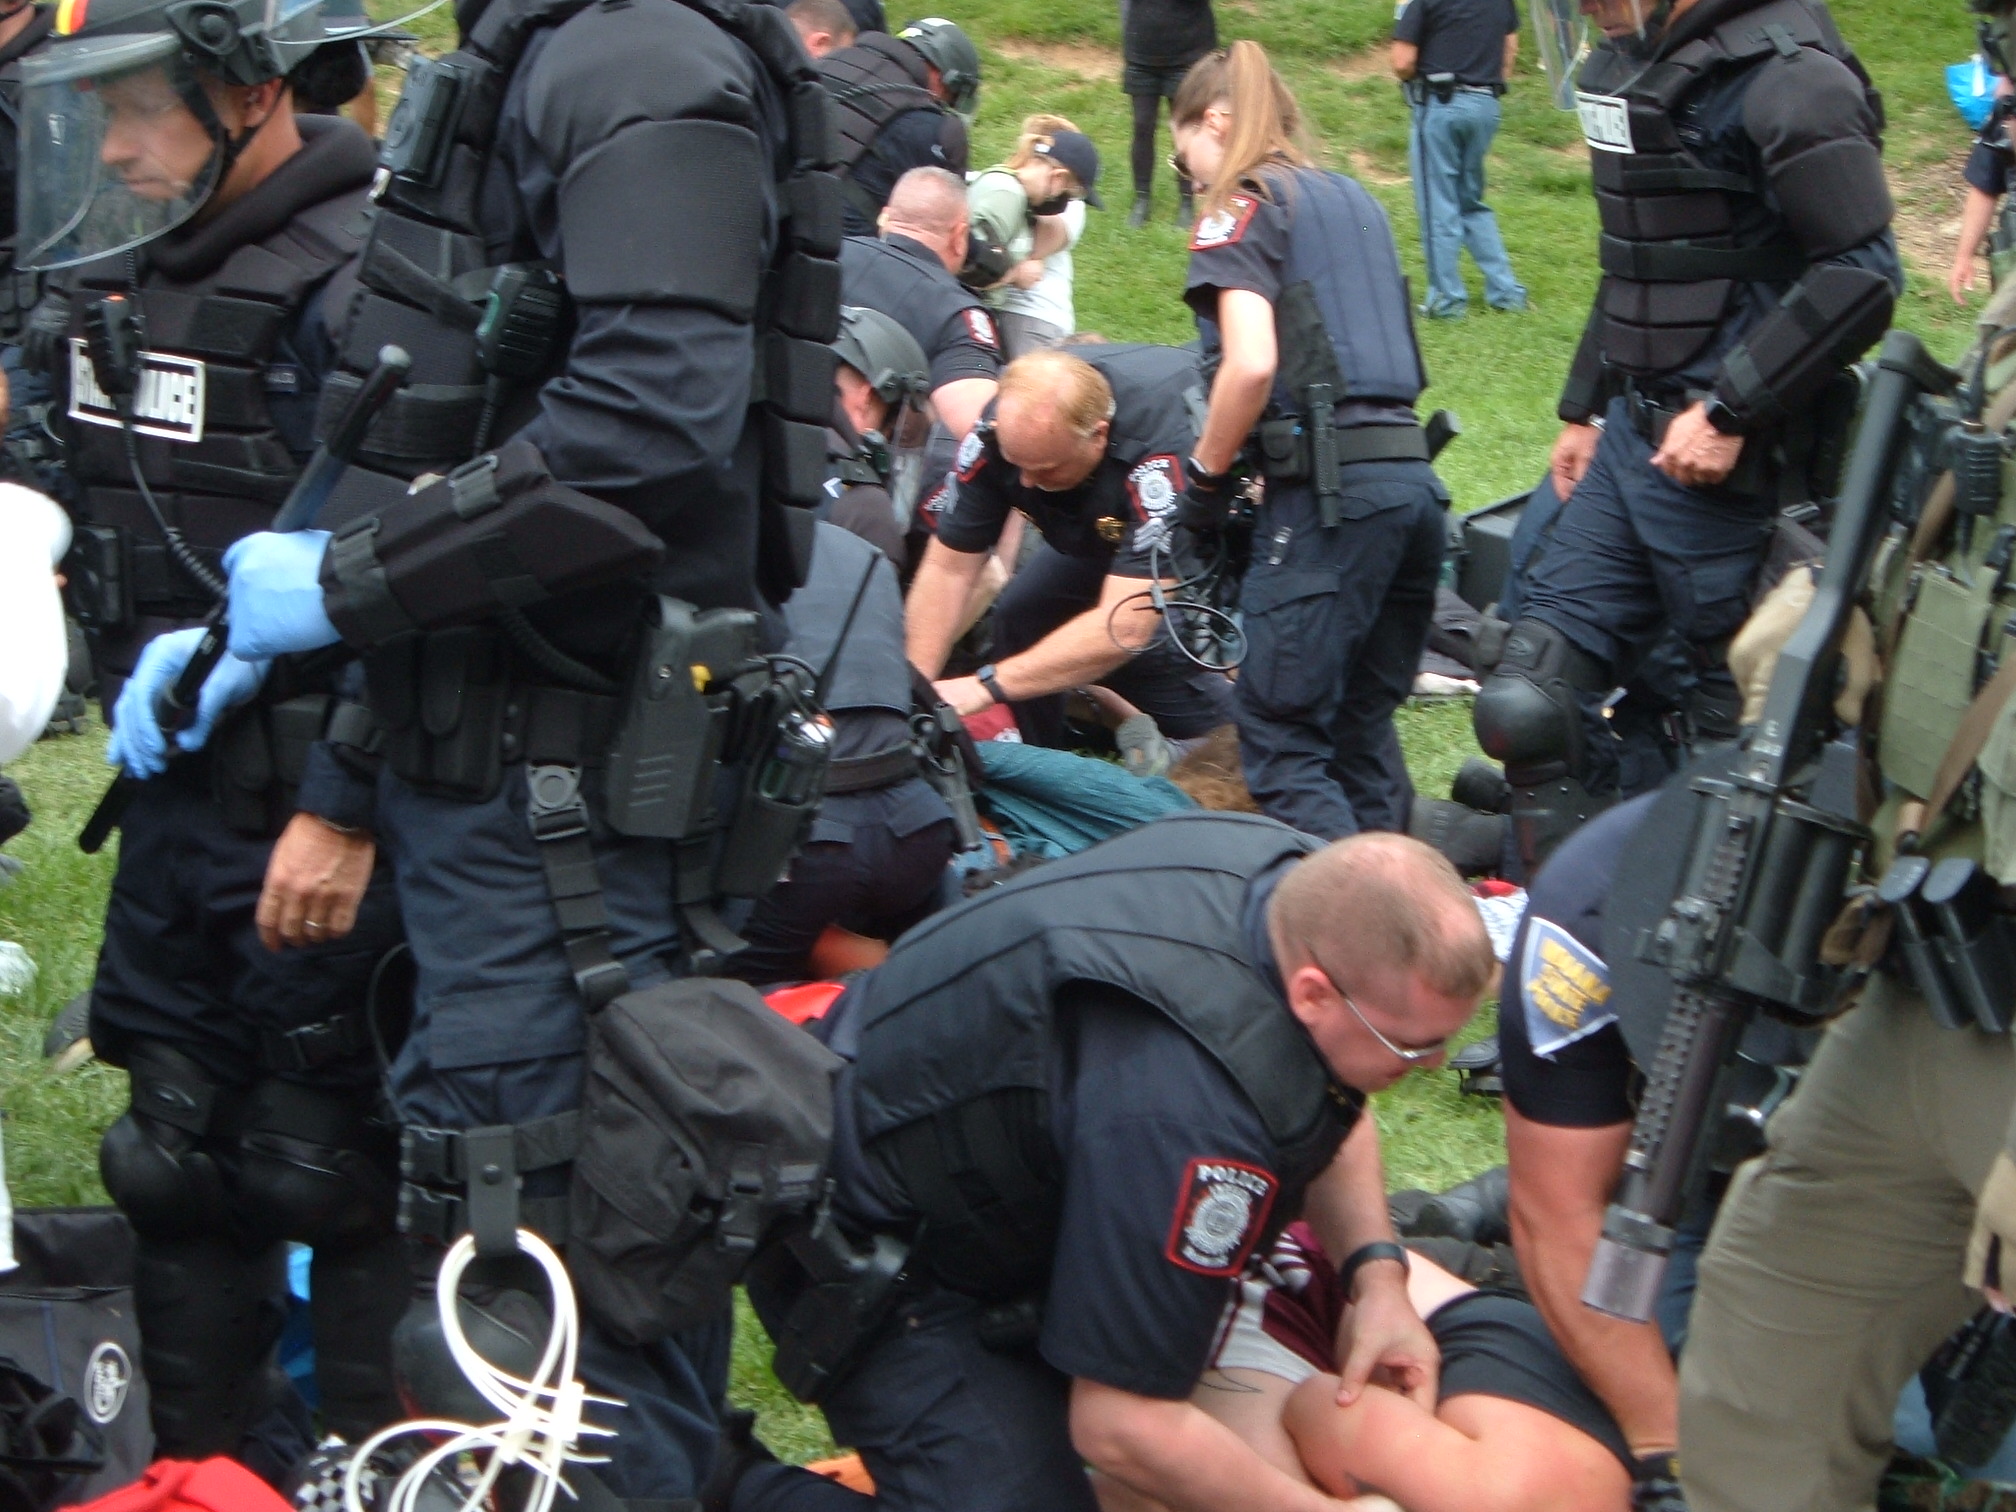 Indiana State Police in riot gear dominate the whole frame as they conduct arrests, a mass of black bullet-proof armor.